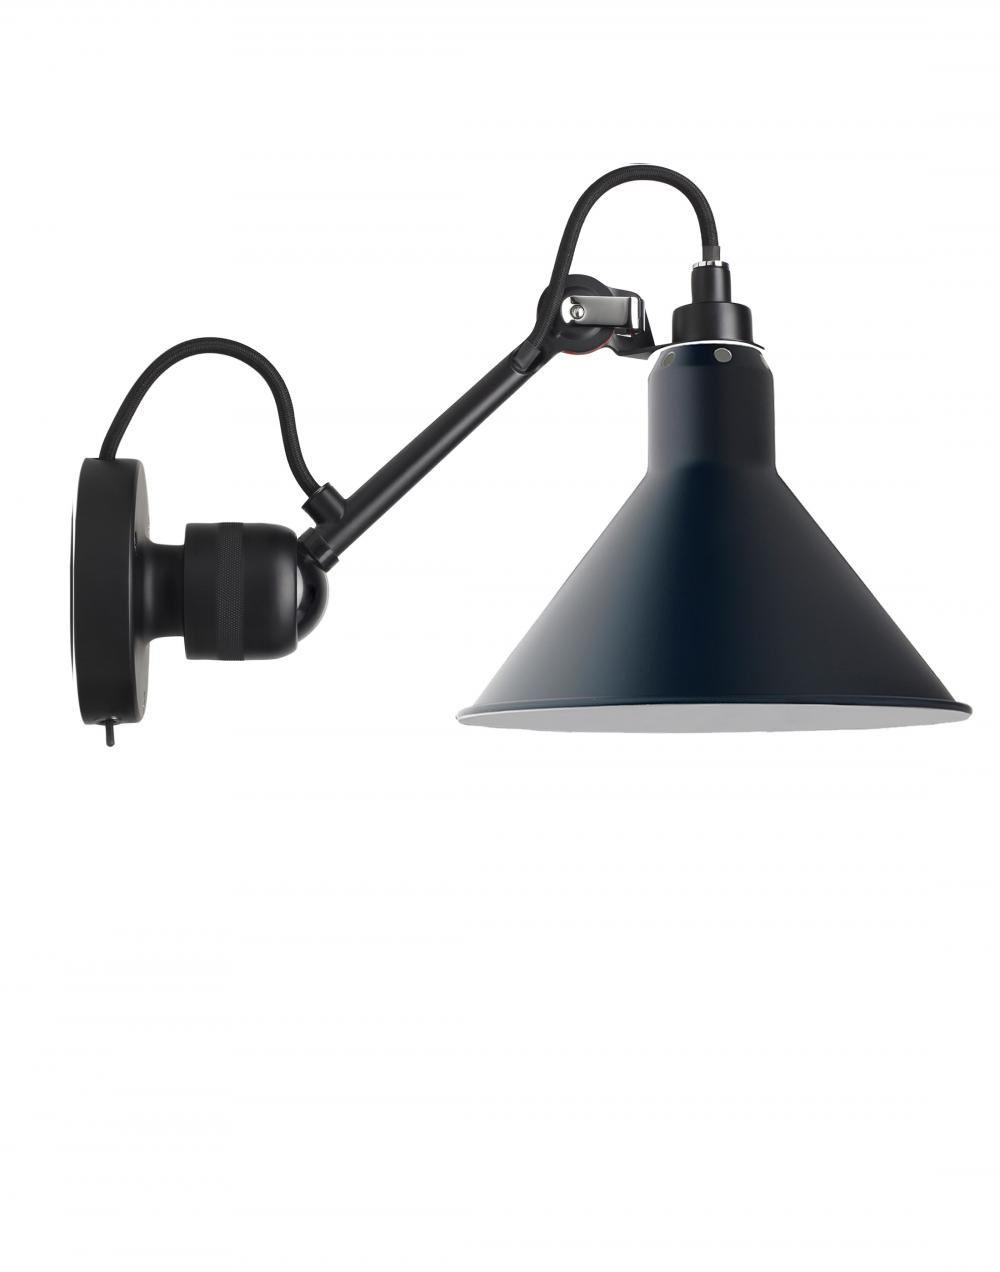 Lampe Gras 304 Small Wall Light Black Arm Blue Shade Conic Integral Switch